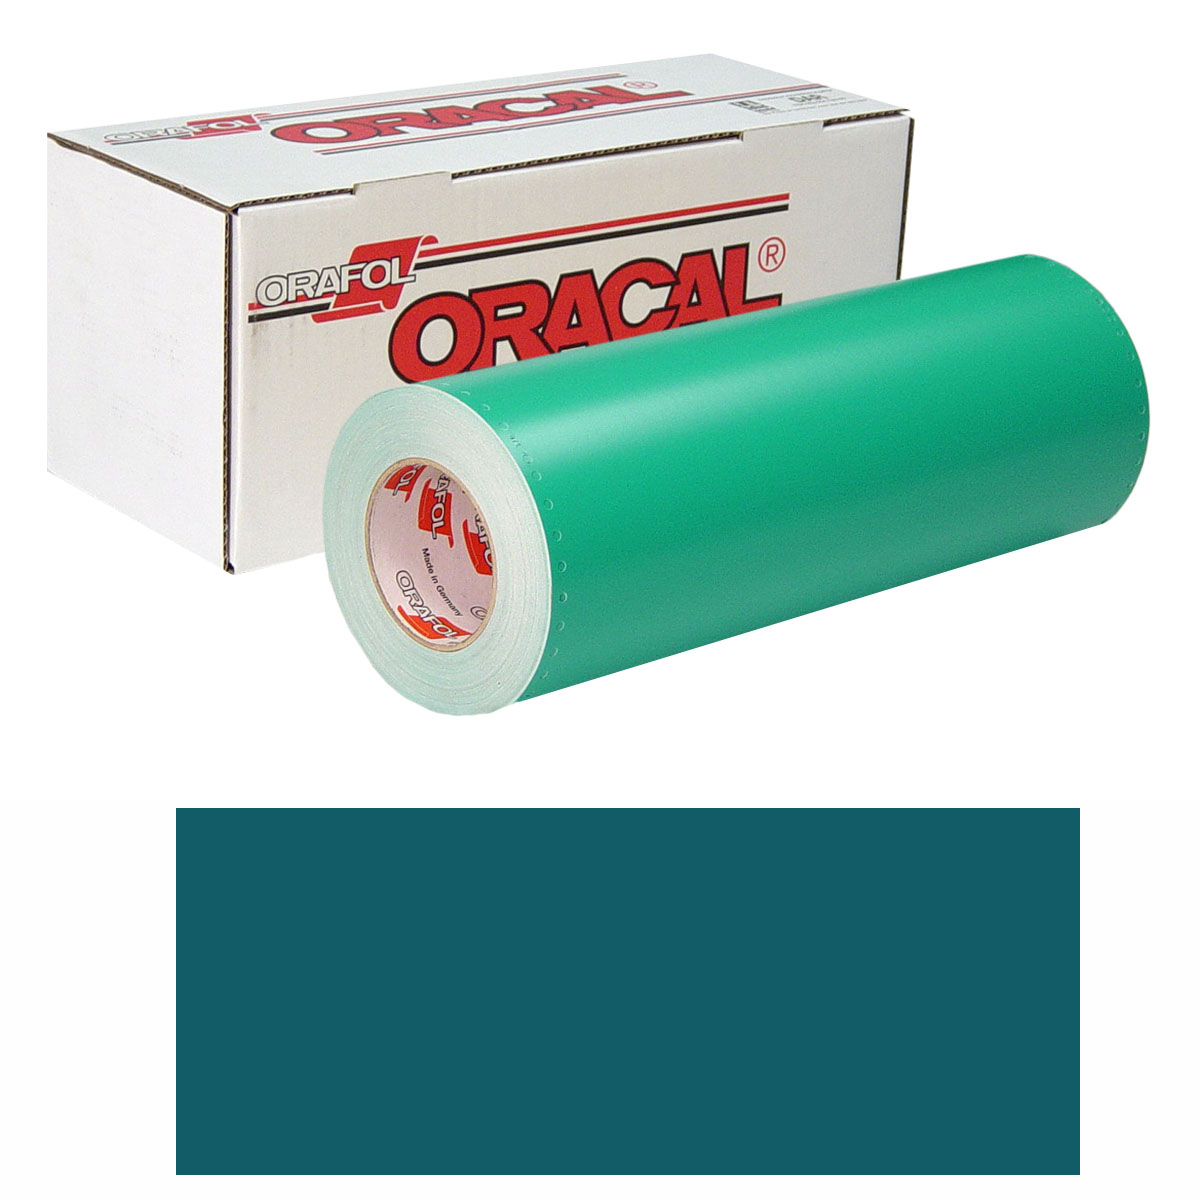 ORACAL 8500 30in X 10yd 541 Dark Turquoise